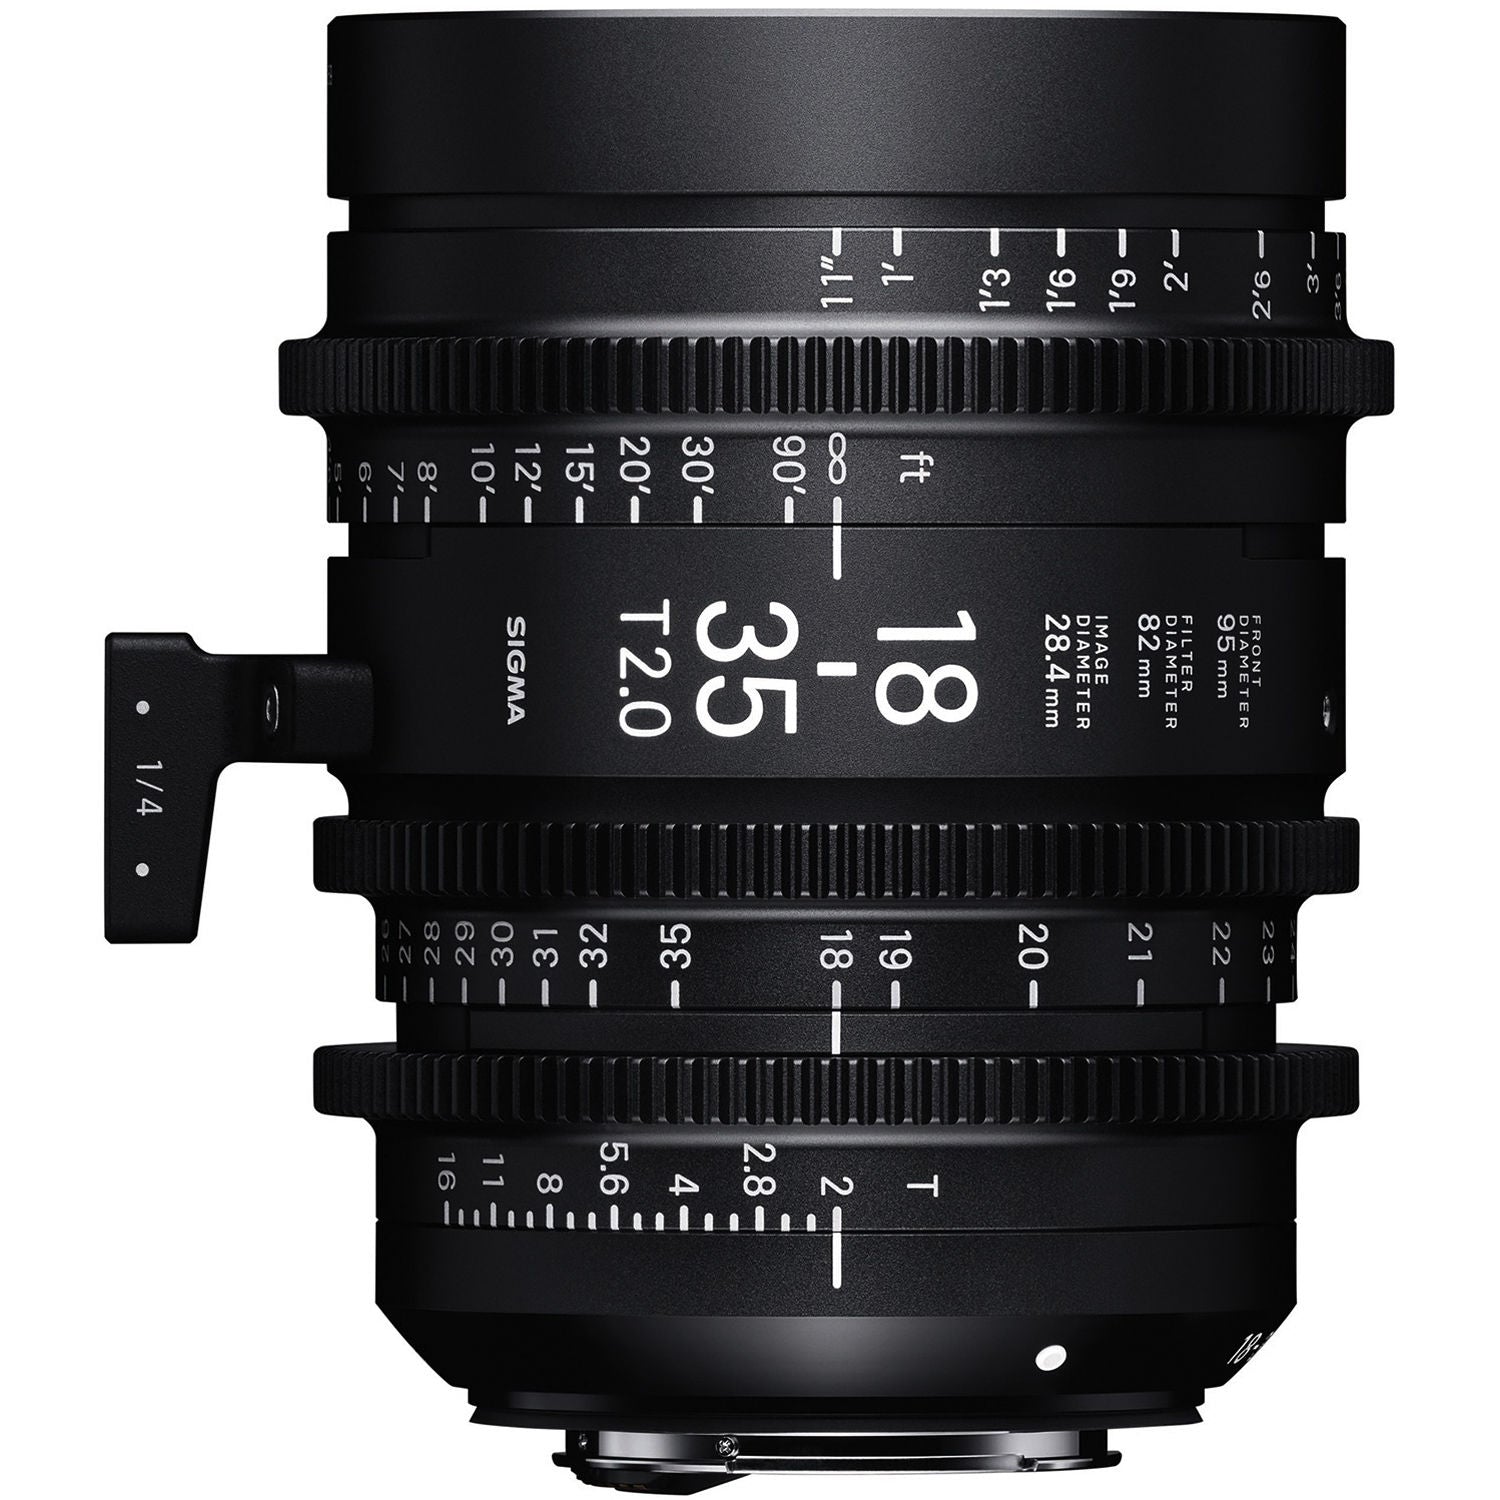 Sigma 18-35mm T2 High-Speed Zoom Lens (PL)